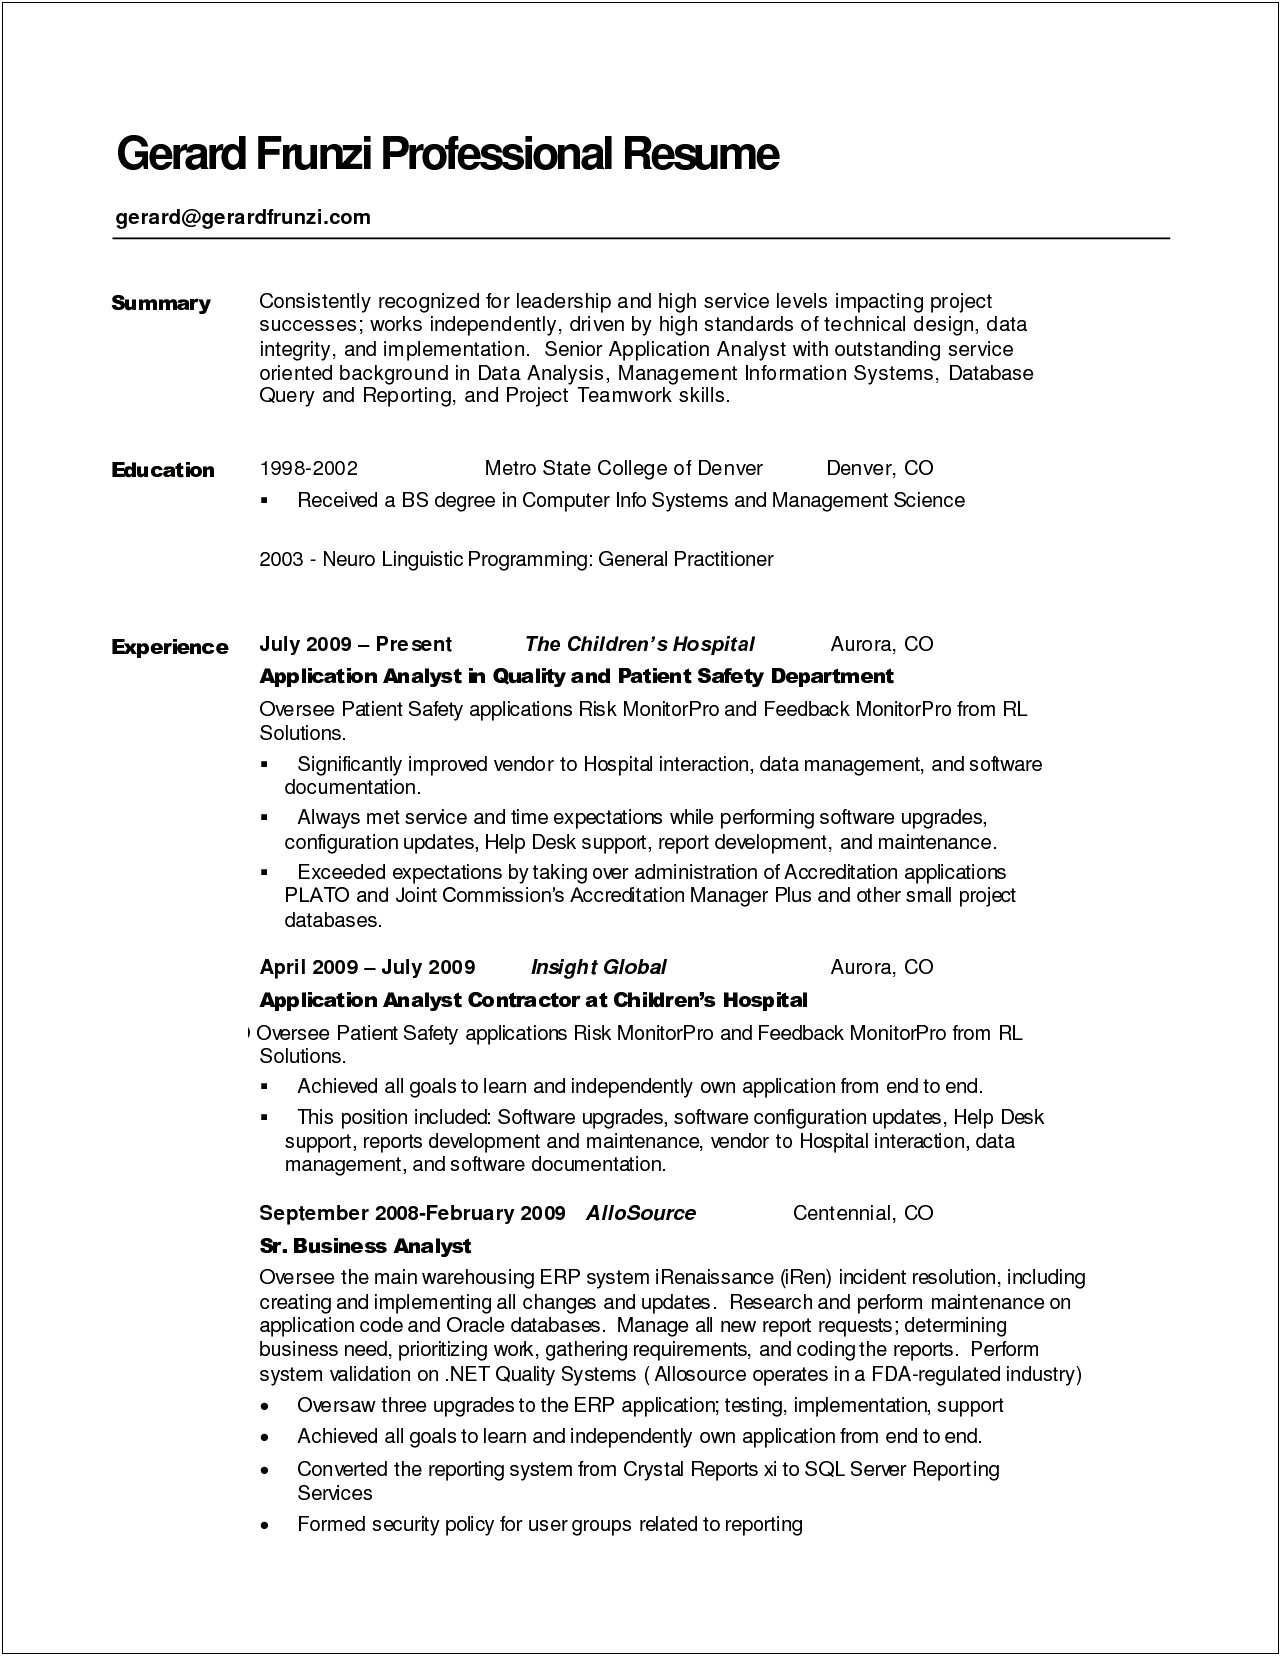 Sample Resume With Personal Brand Statement